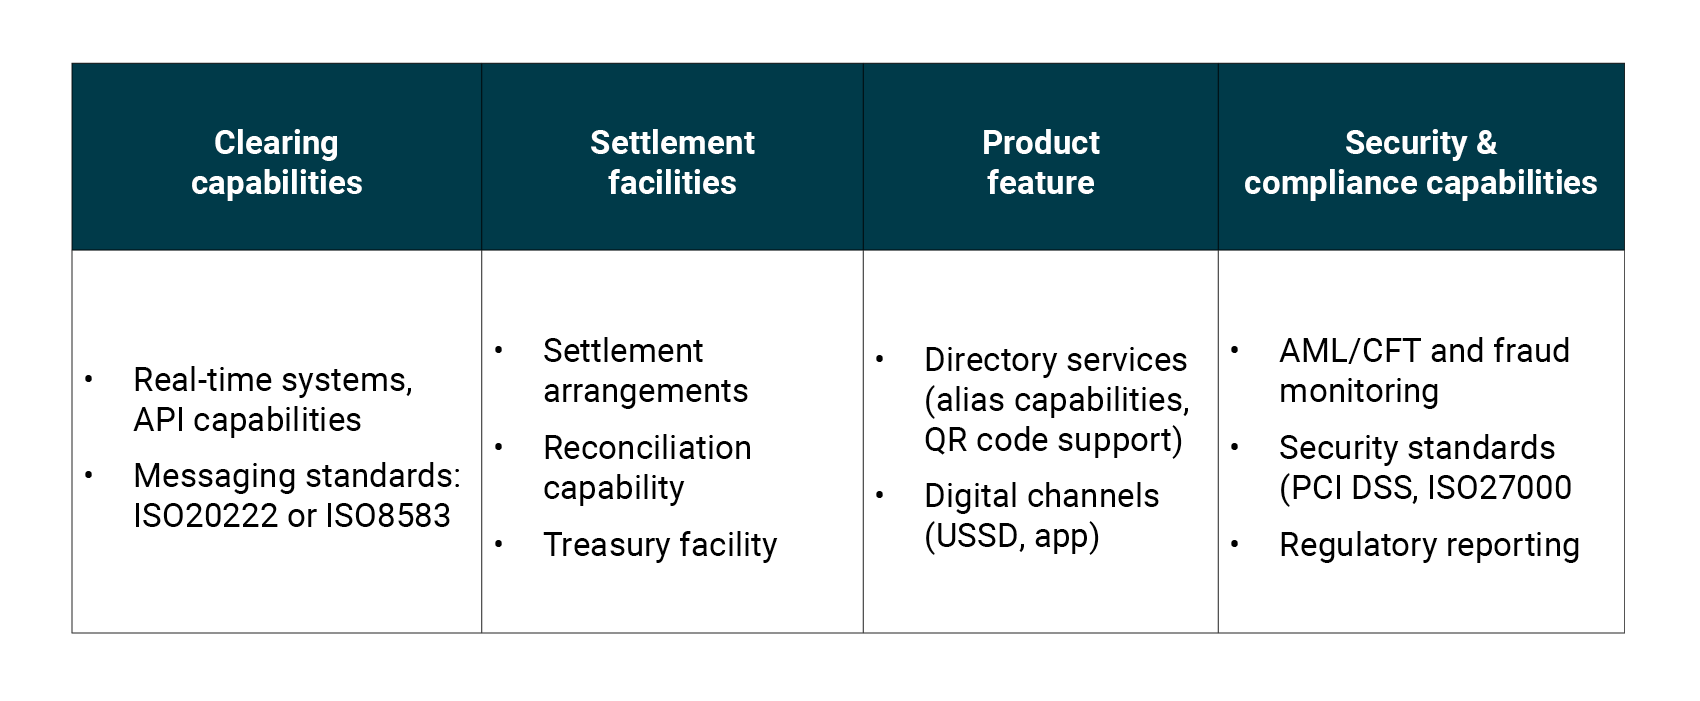 Figure 2: Example requirements for joining an instant payment system 